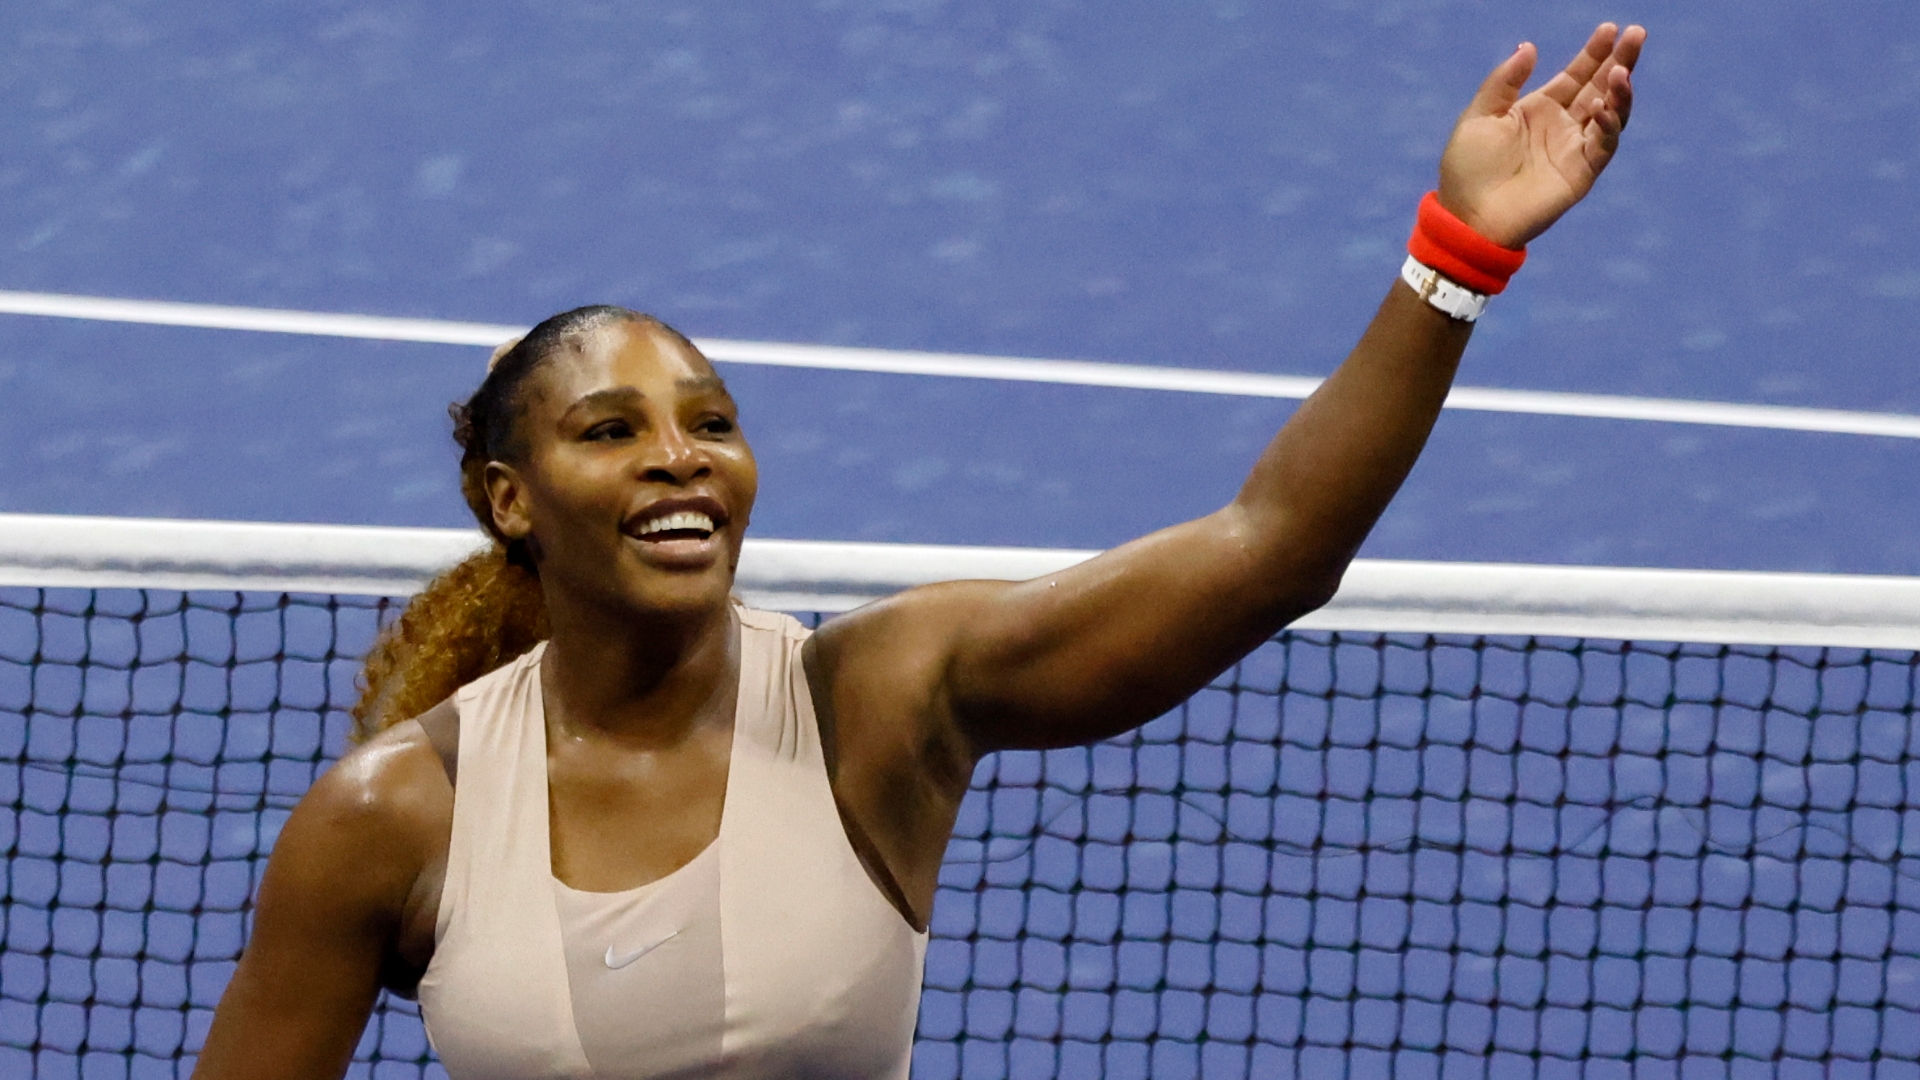 Serena advances to 3rd round after straight-sets victory